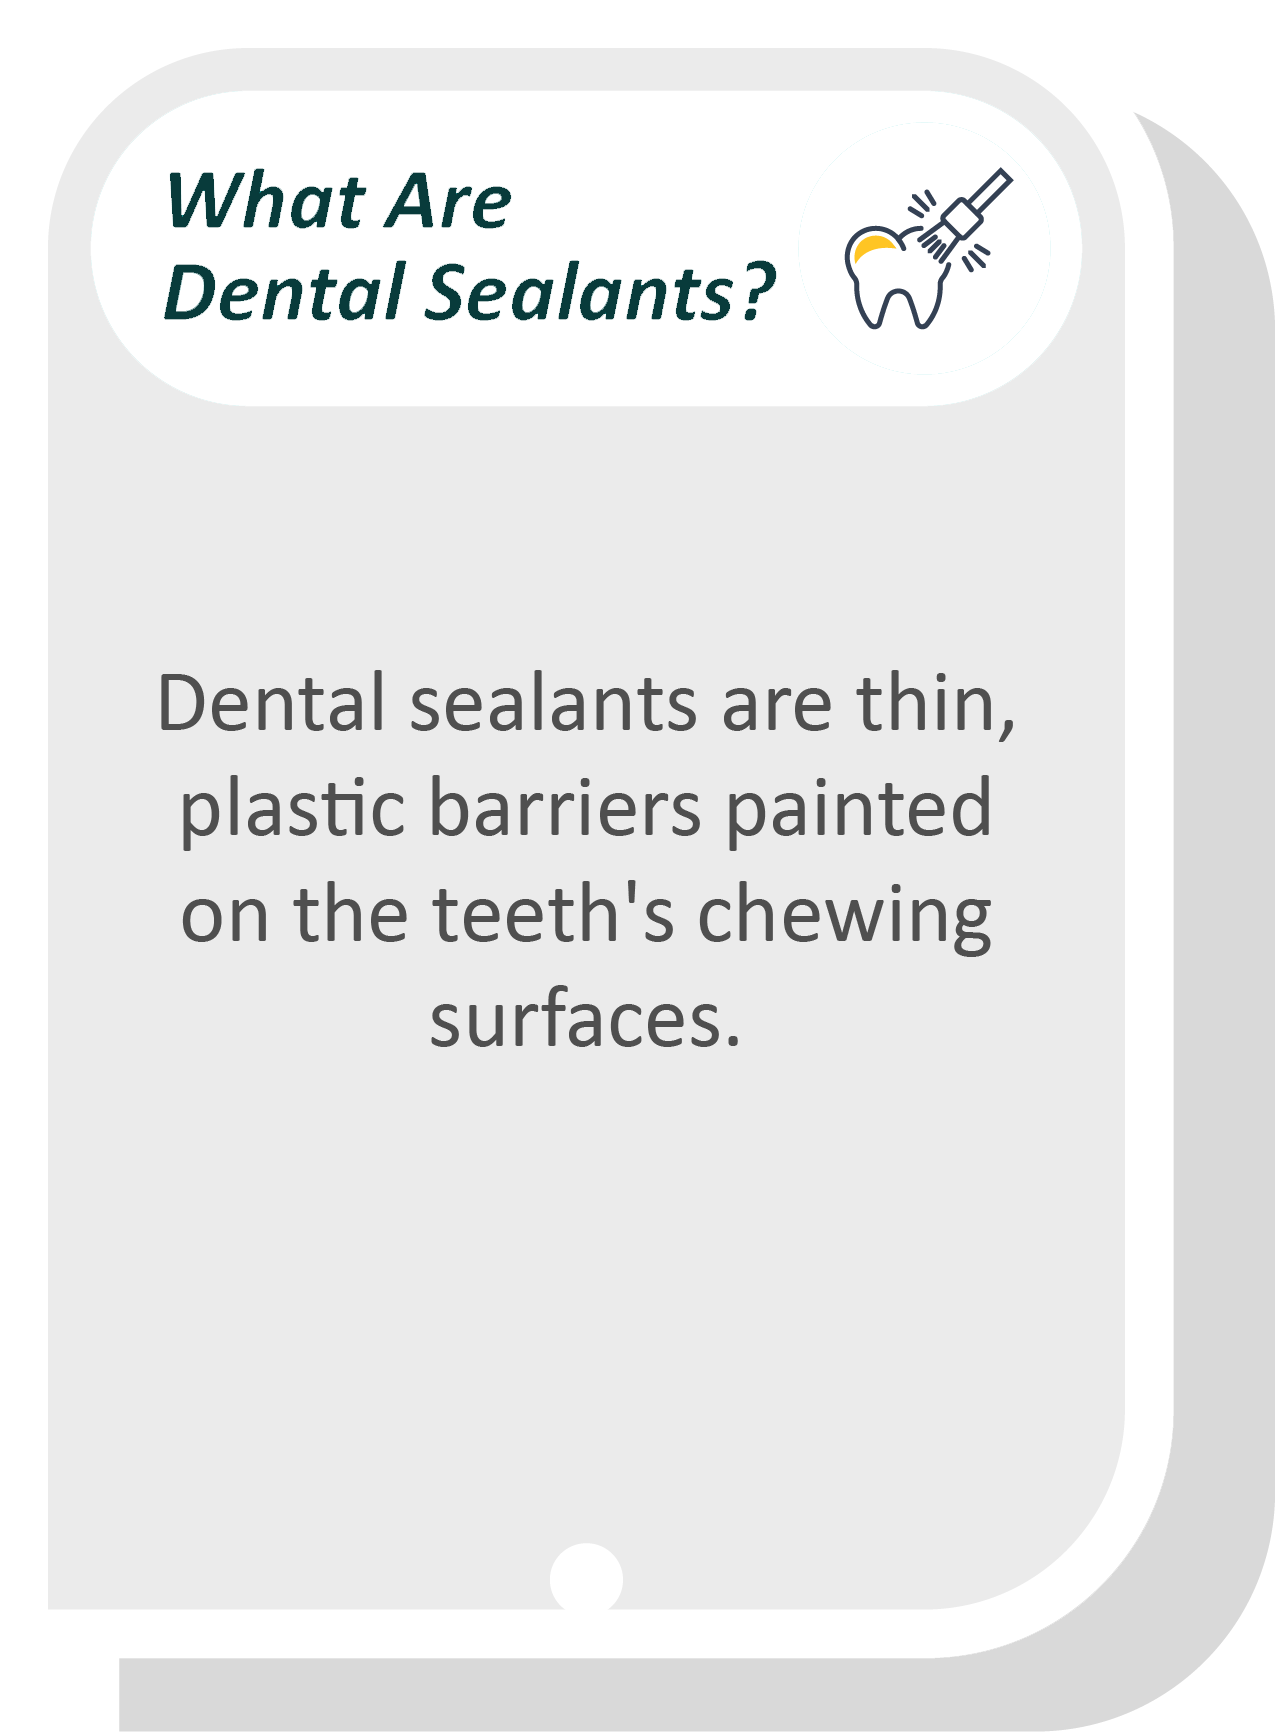 Dental sealants infographic: Dental sealants are thin, plastic barriers painted on the teeth's chewing surfaces.